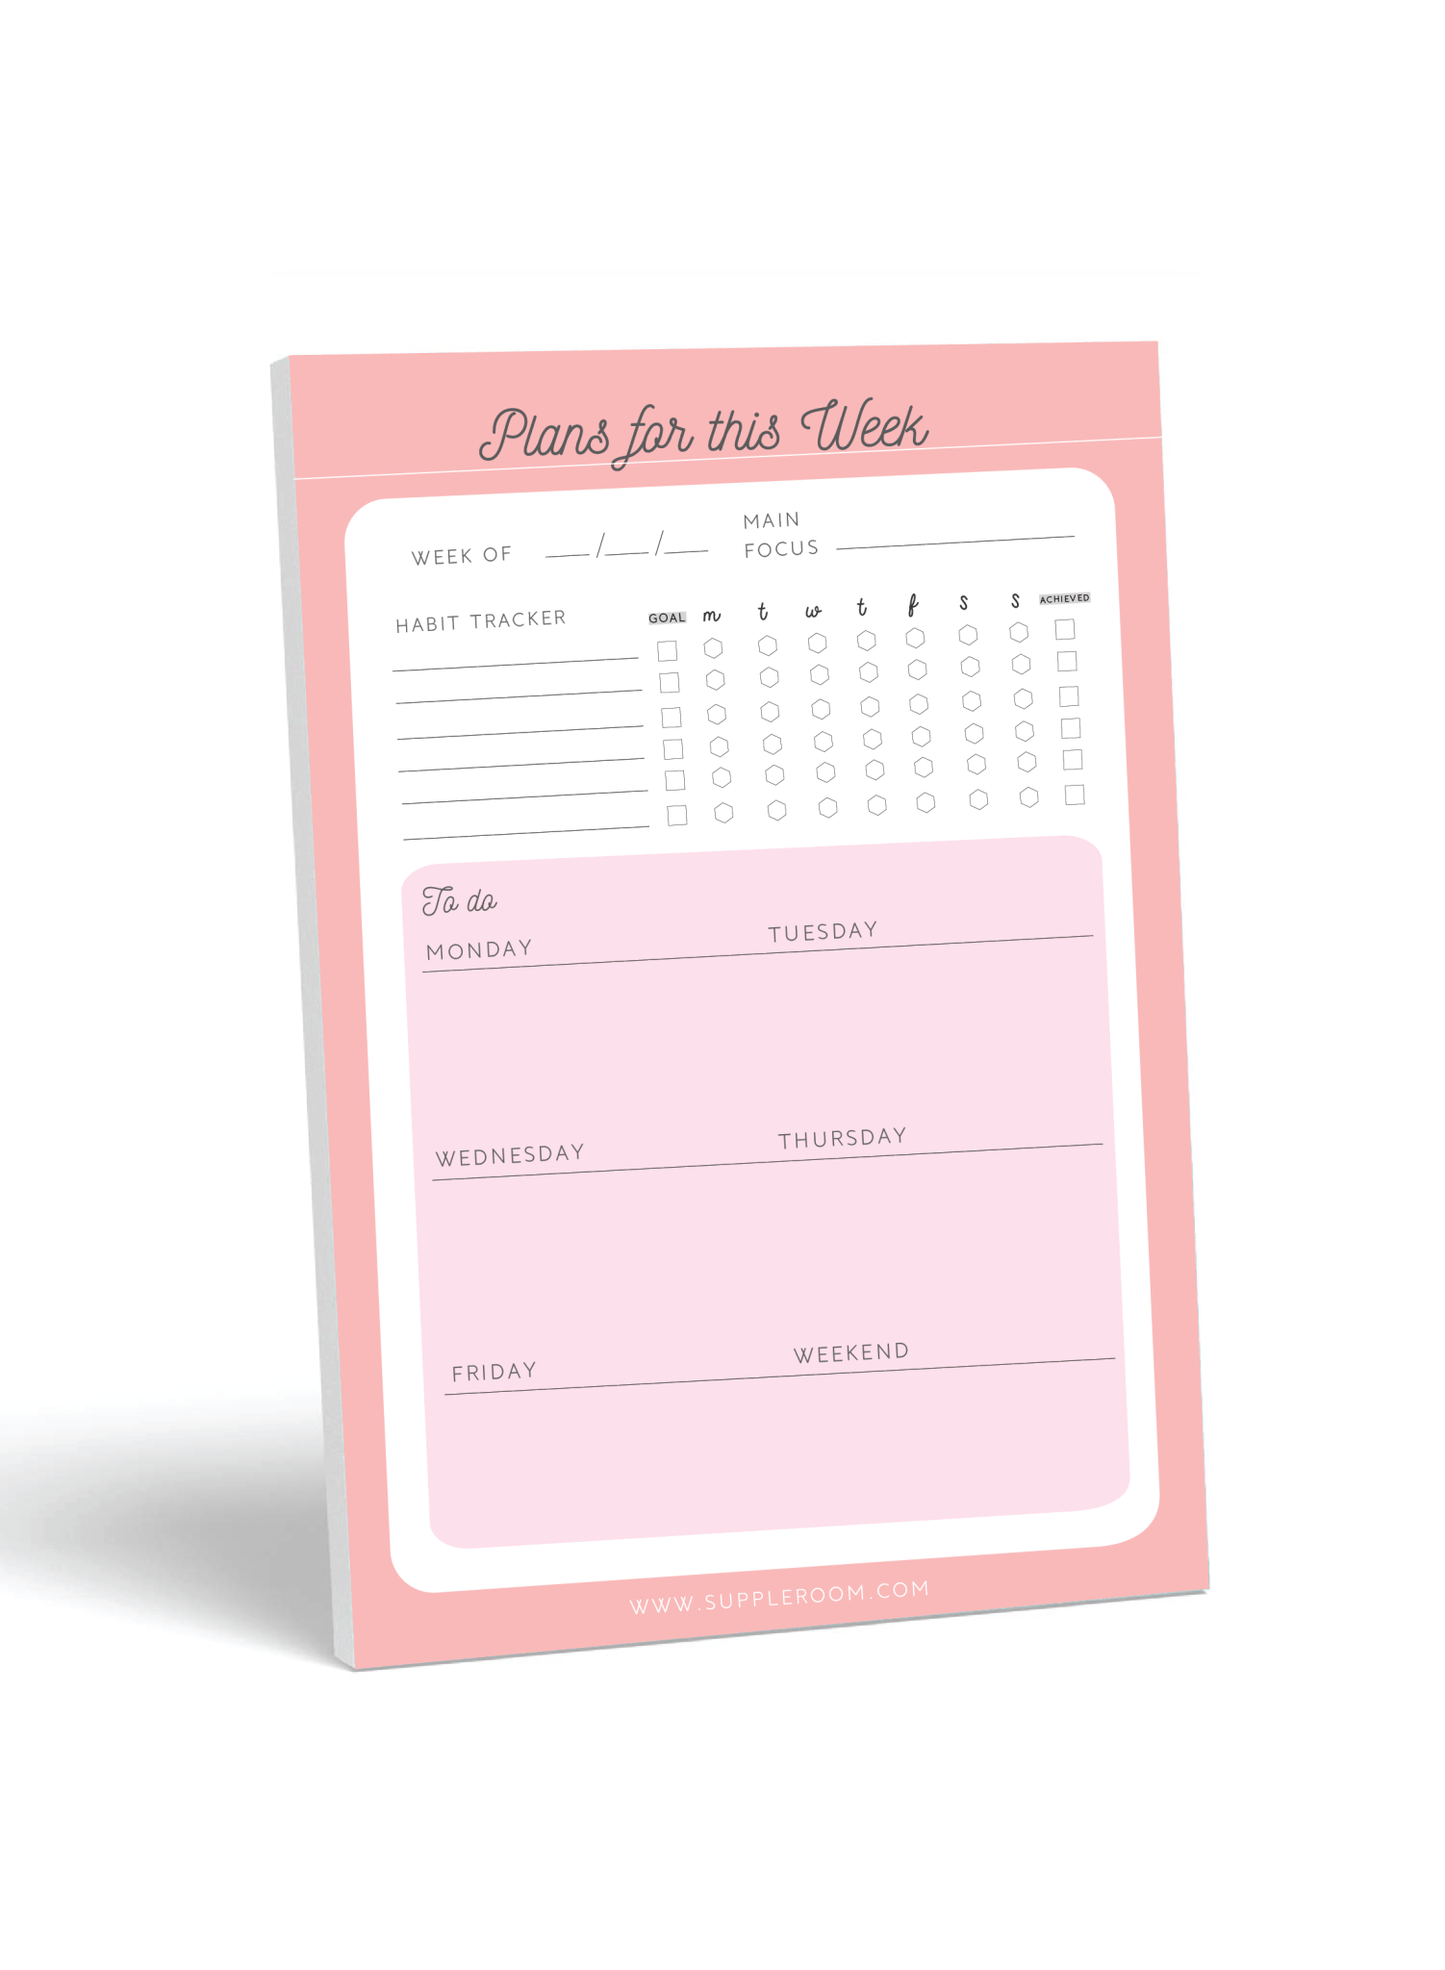 Weekly Planner | 50 Sheets Pad - Supple Room